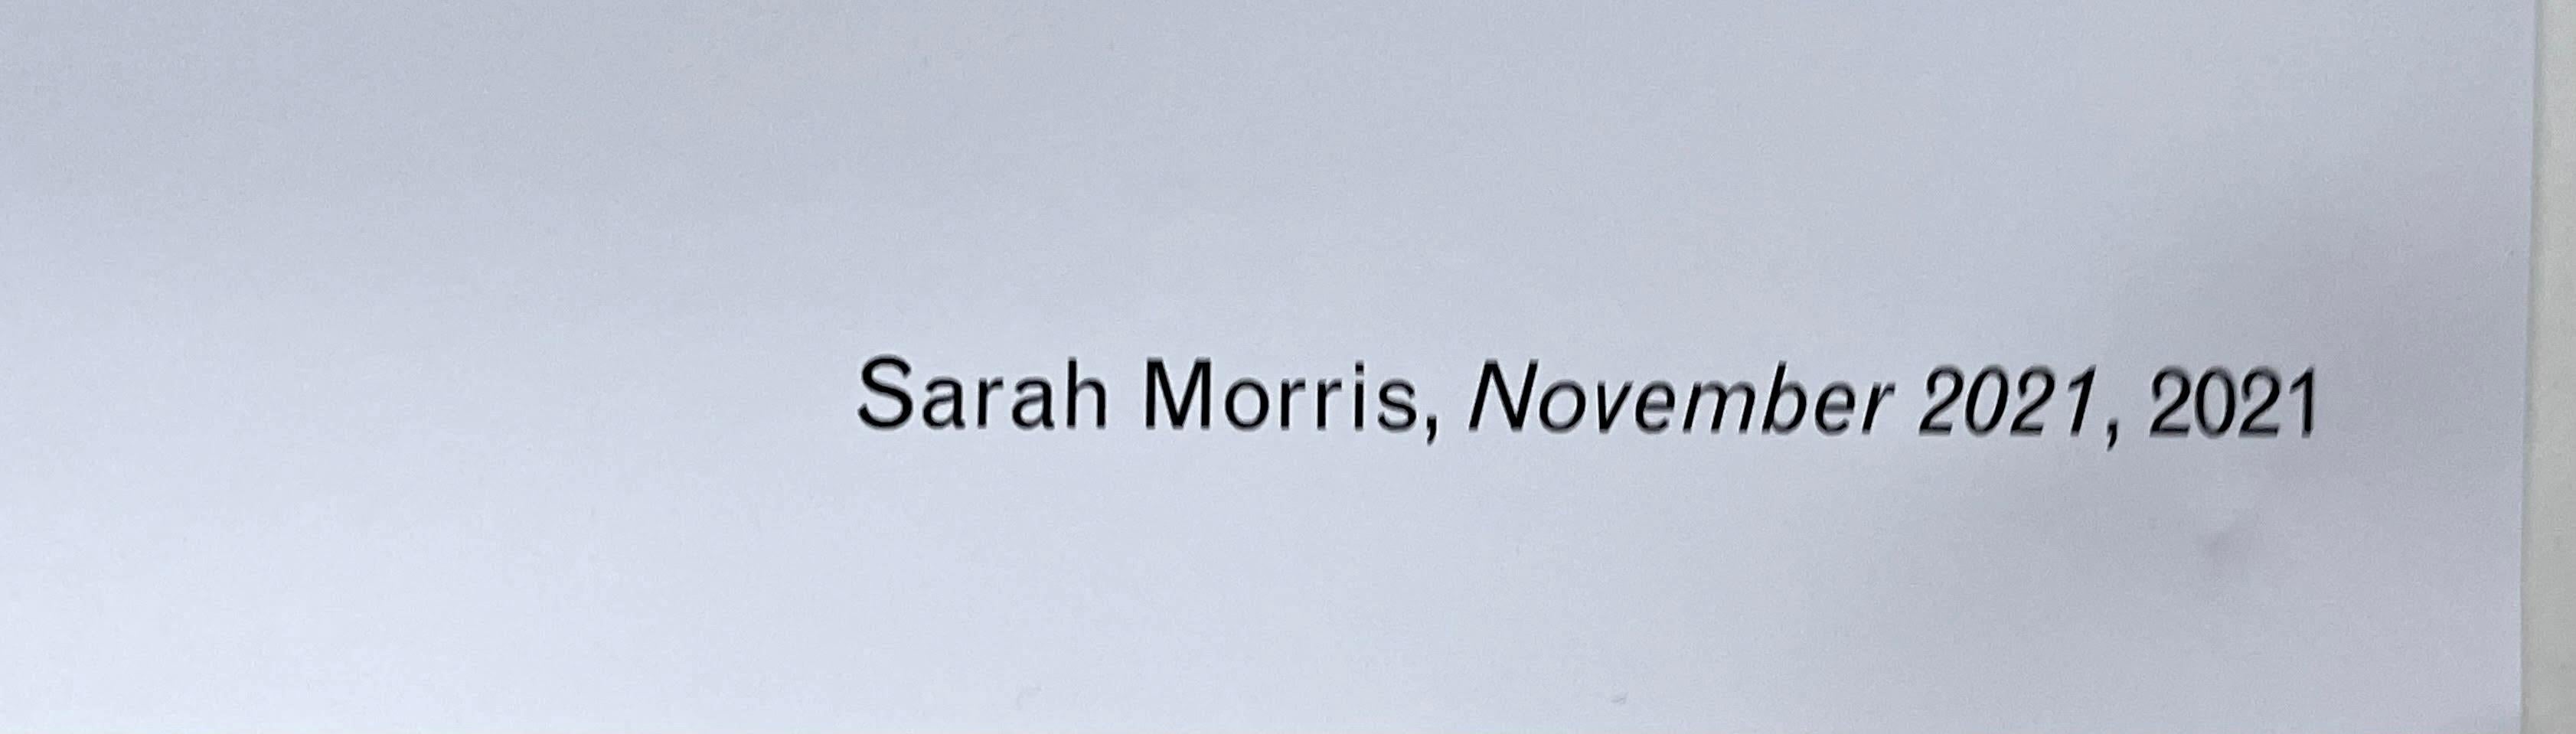 Sarah Morris
November 2021, 2021
Lithograph on wove paper
The work itself is not signed and it comes with a certificate of authenticity -  hand signed by Sarah Morris (the artist) as well as the head of ICA Editions, and individually numbered 17/100